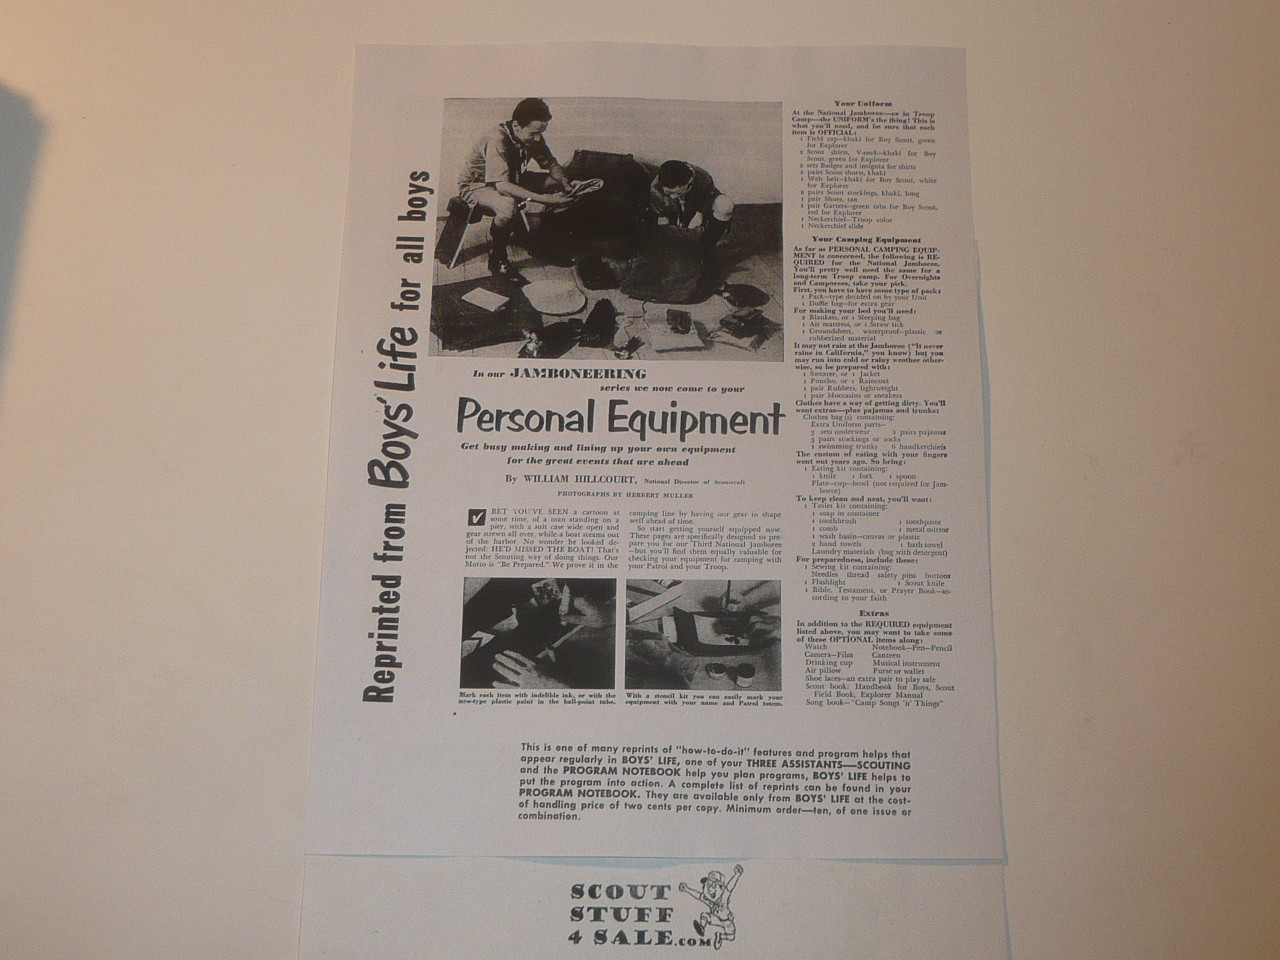 Personal Equipment, By Green Bar Bill, Boys' Life Single Topic Reprint from the 1950's - 1960's , written for Scouts, great teaching materials